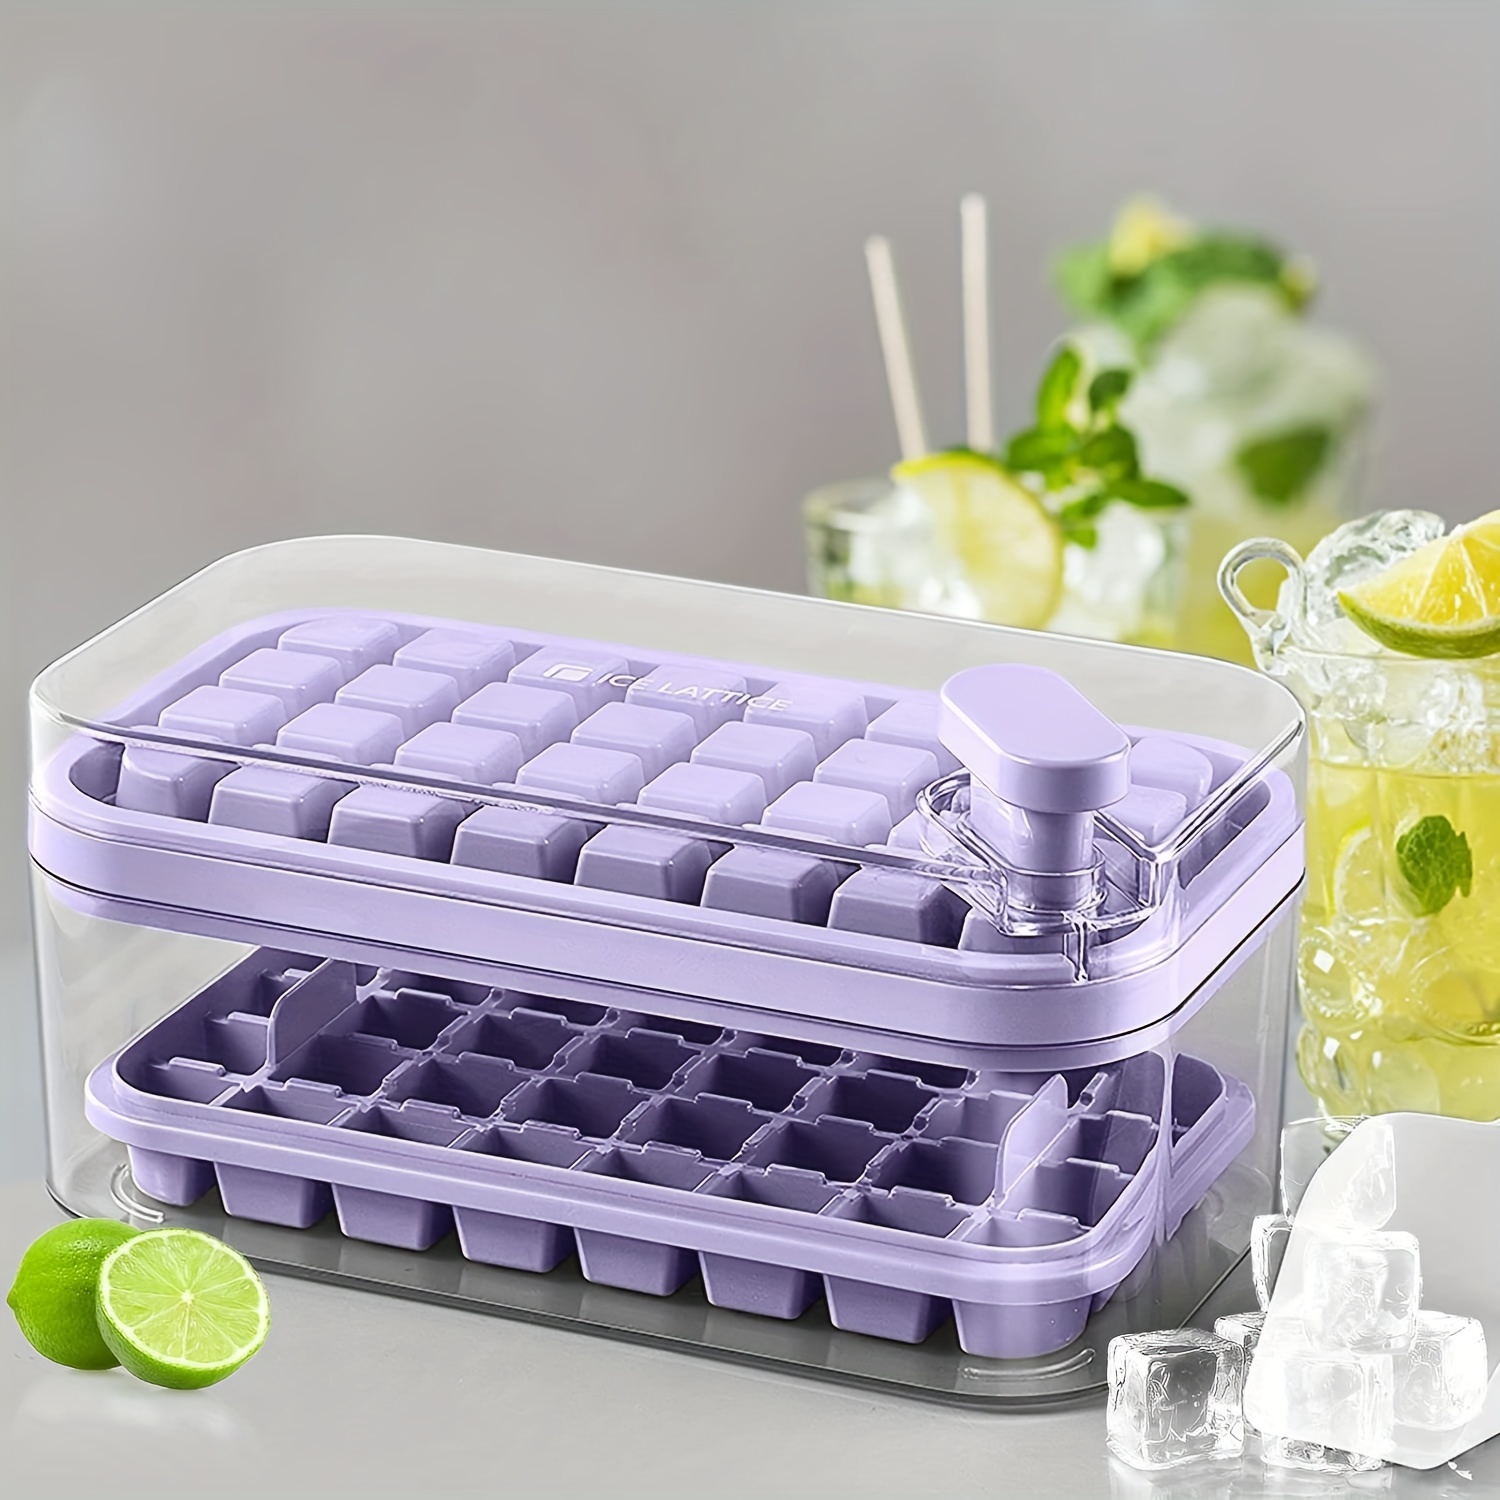 Ice Cube Tray With Lid Ice Cube Tray Ice Trays For Freezer With Lid And Bin  Circle Ice Mold Making Small Ice Cubes Square Ice - AliExpress